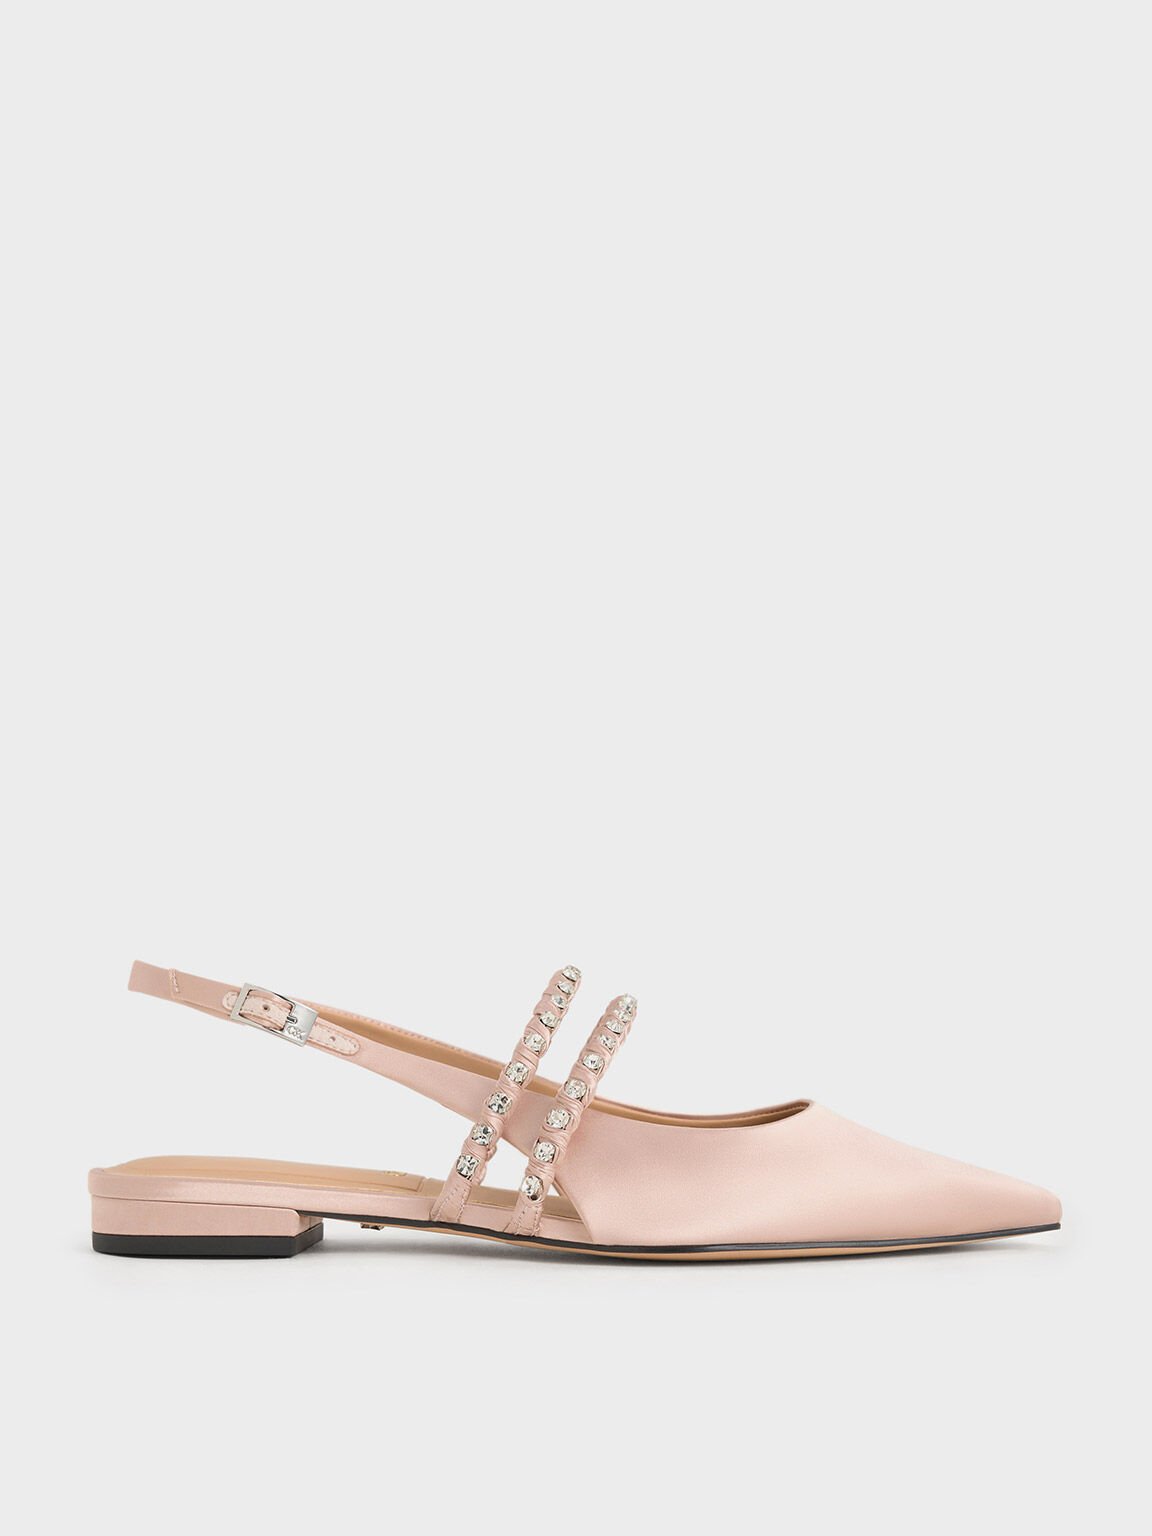 Sepatu Flats Mary Jane Gem-Encrusted Recycled Polyester Goldie, Light Pink, hi-res